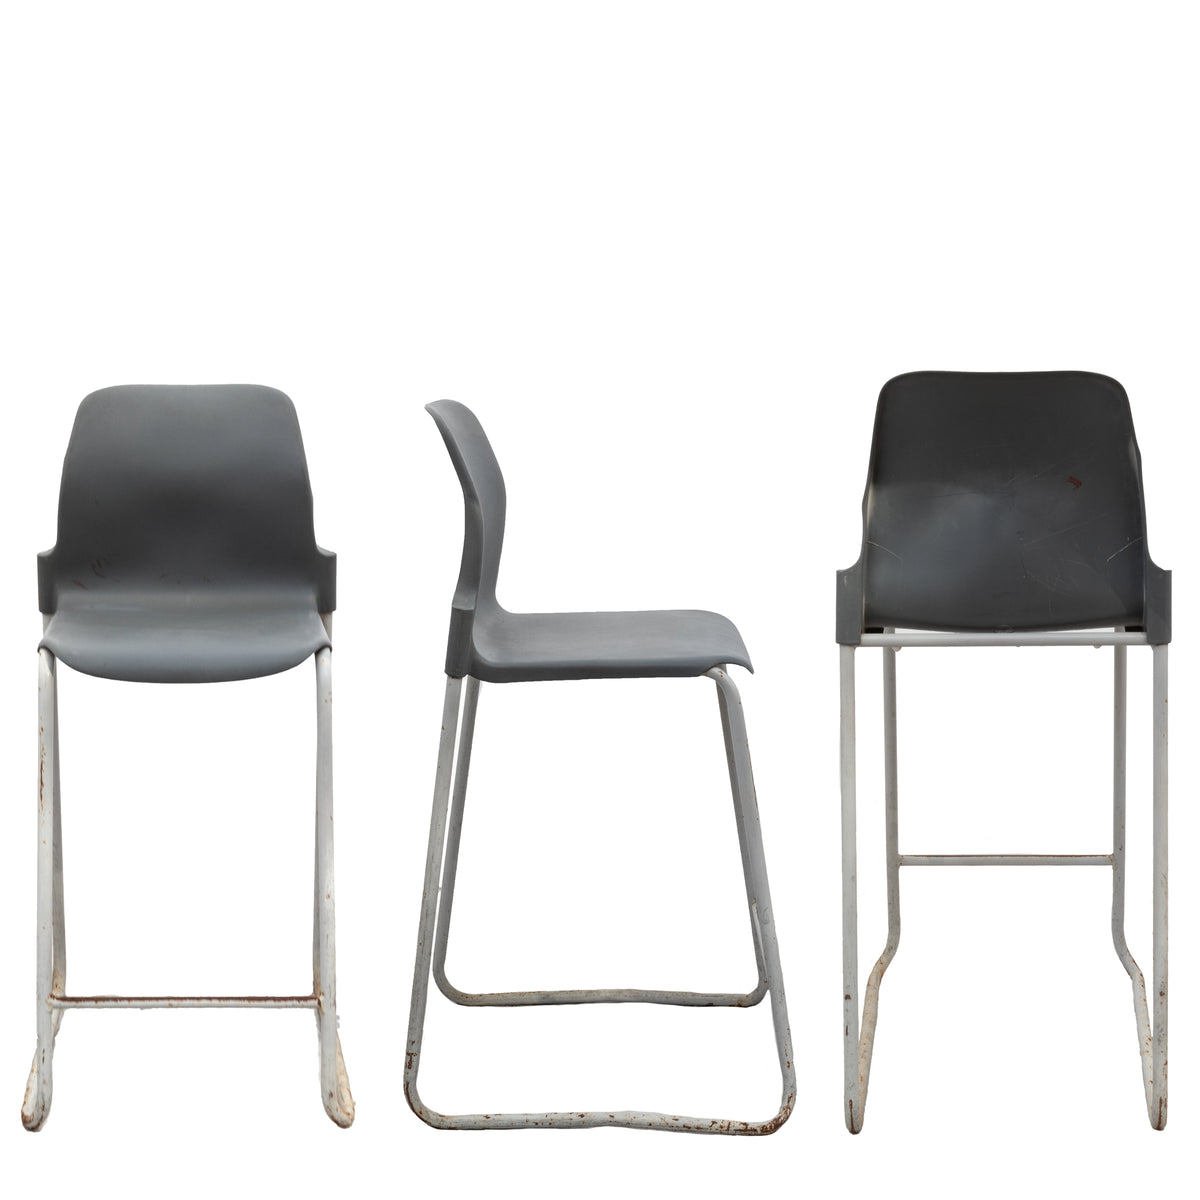 Set of 55 Mid-Century Style Stackable Stools | The Architectural Forum